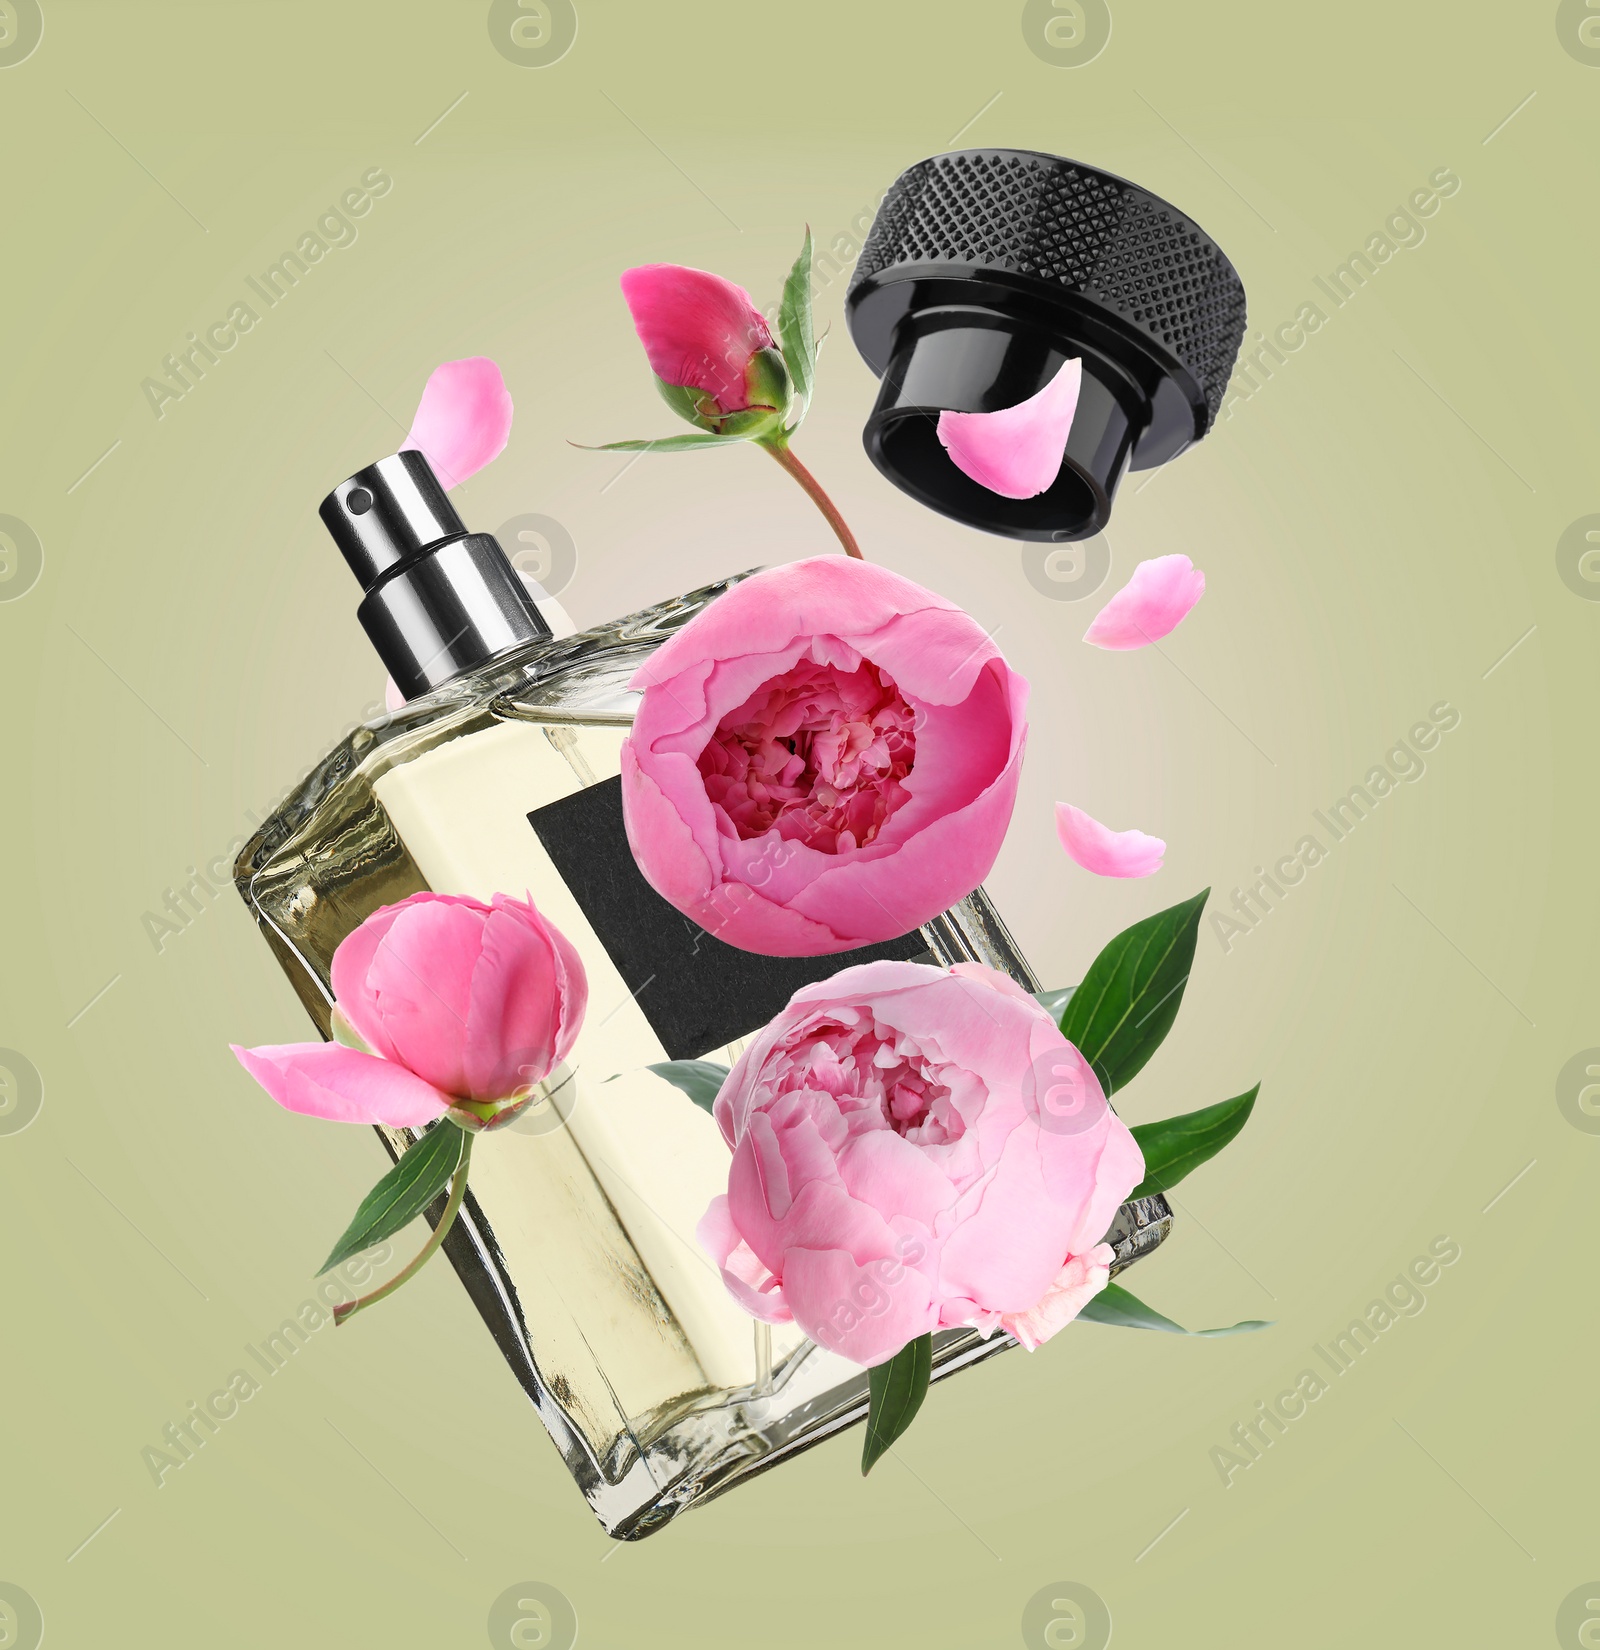 Image of Bottle of perfume and peonies in air on olive background. Flower fragrance